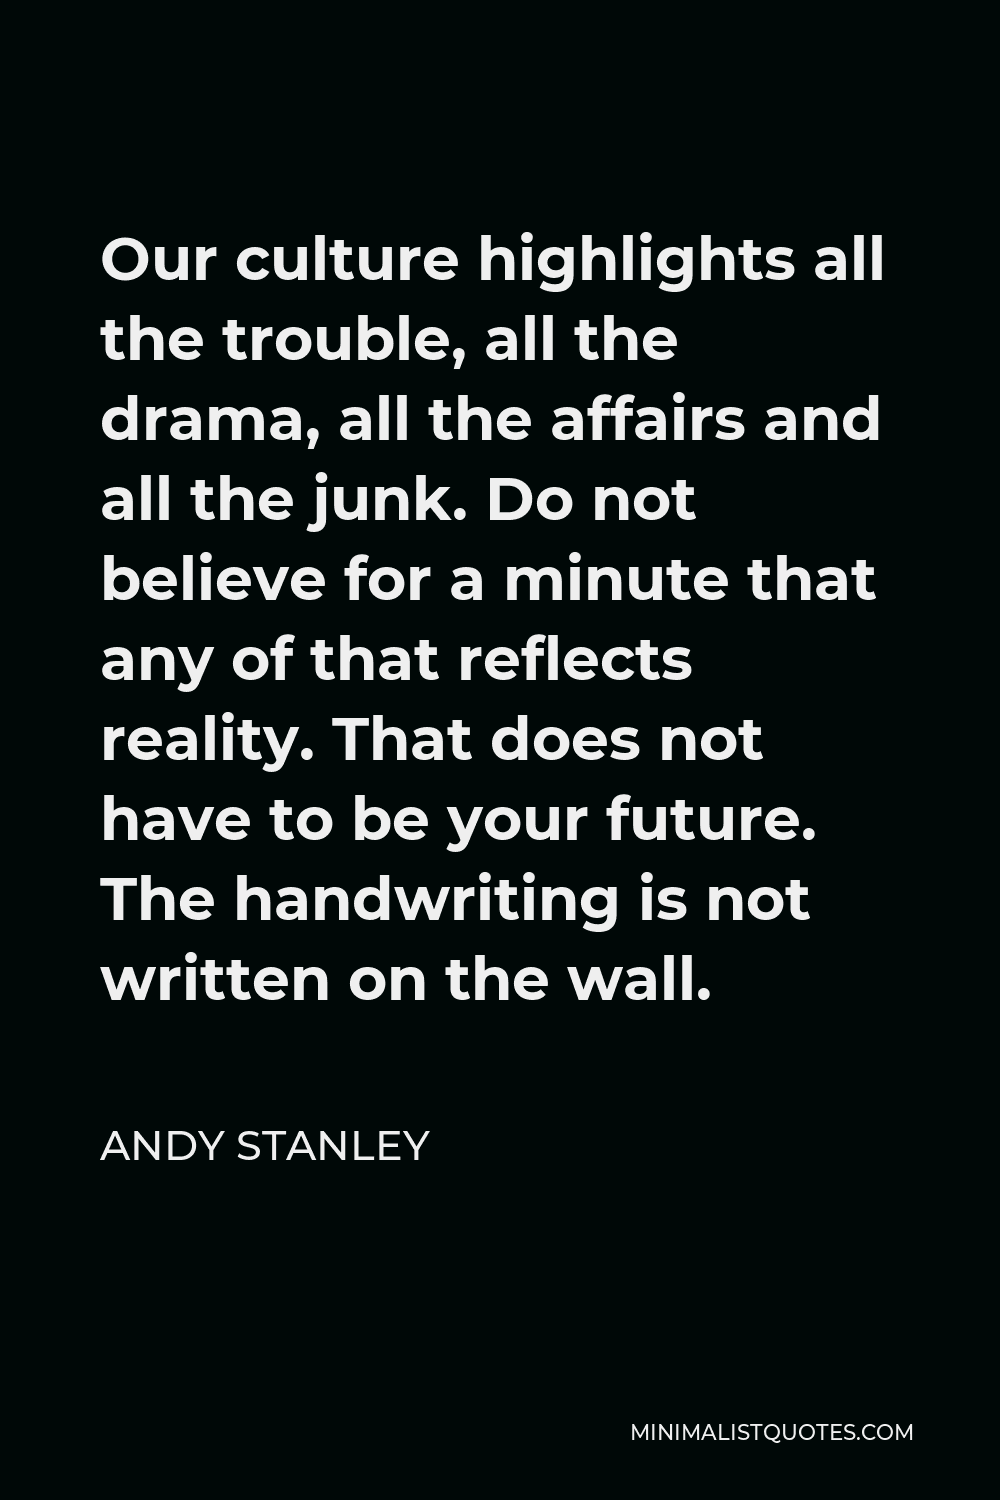 Andy Stanley Quote - Our culture highlights all the trouble, all the drama, all the affairs and all the junk. Do not believe for a minute that any of that reflects reality. That does not have to be your future. The handwriting is not written on the wall.